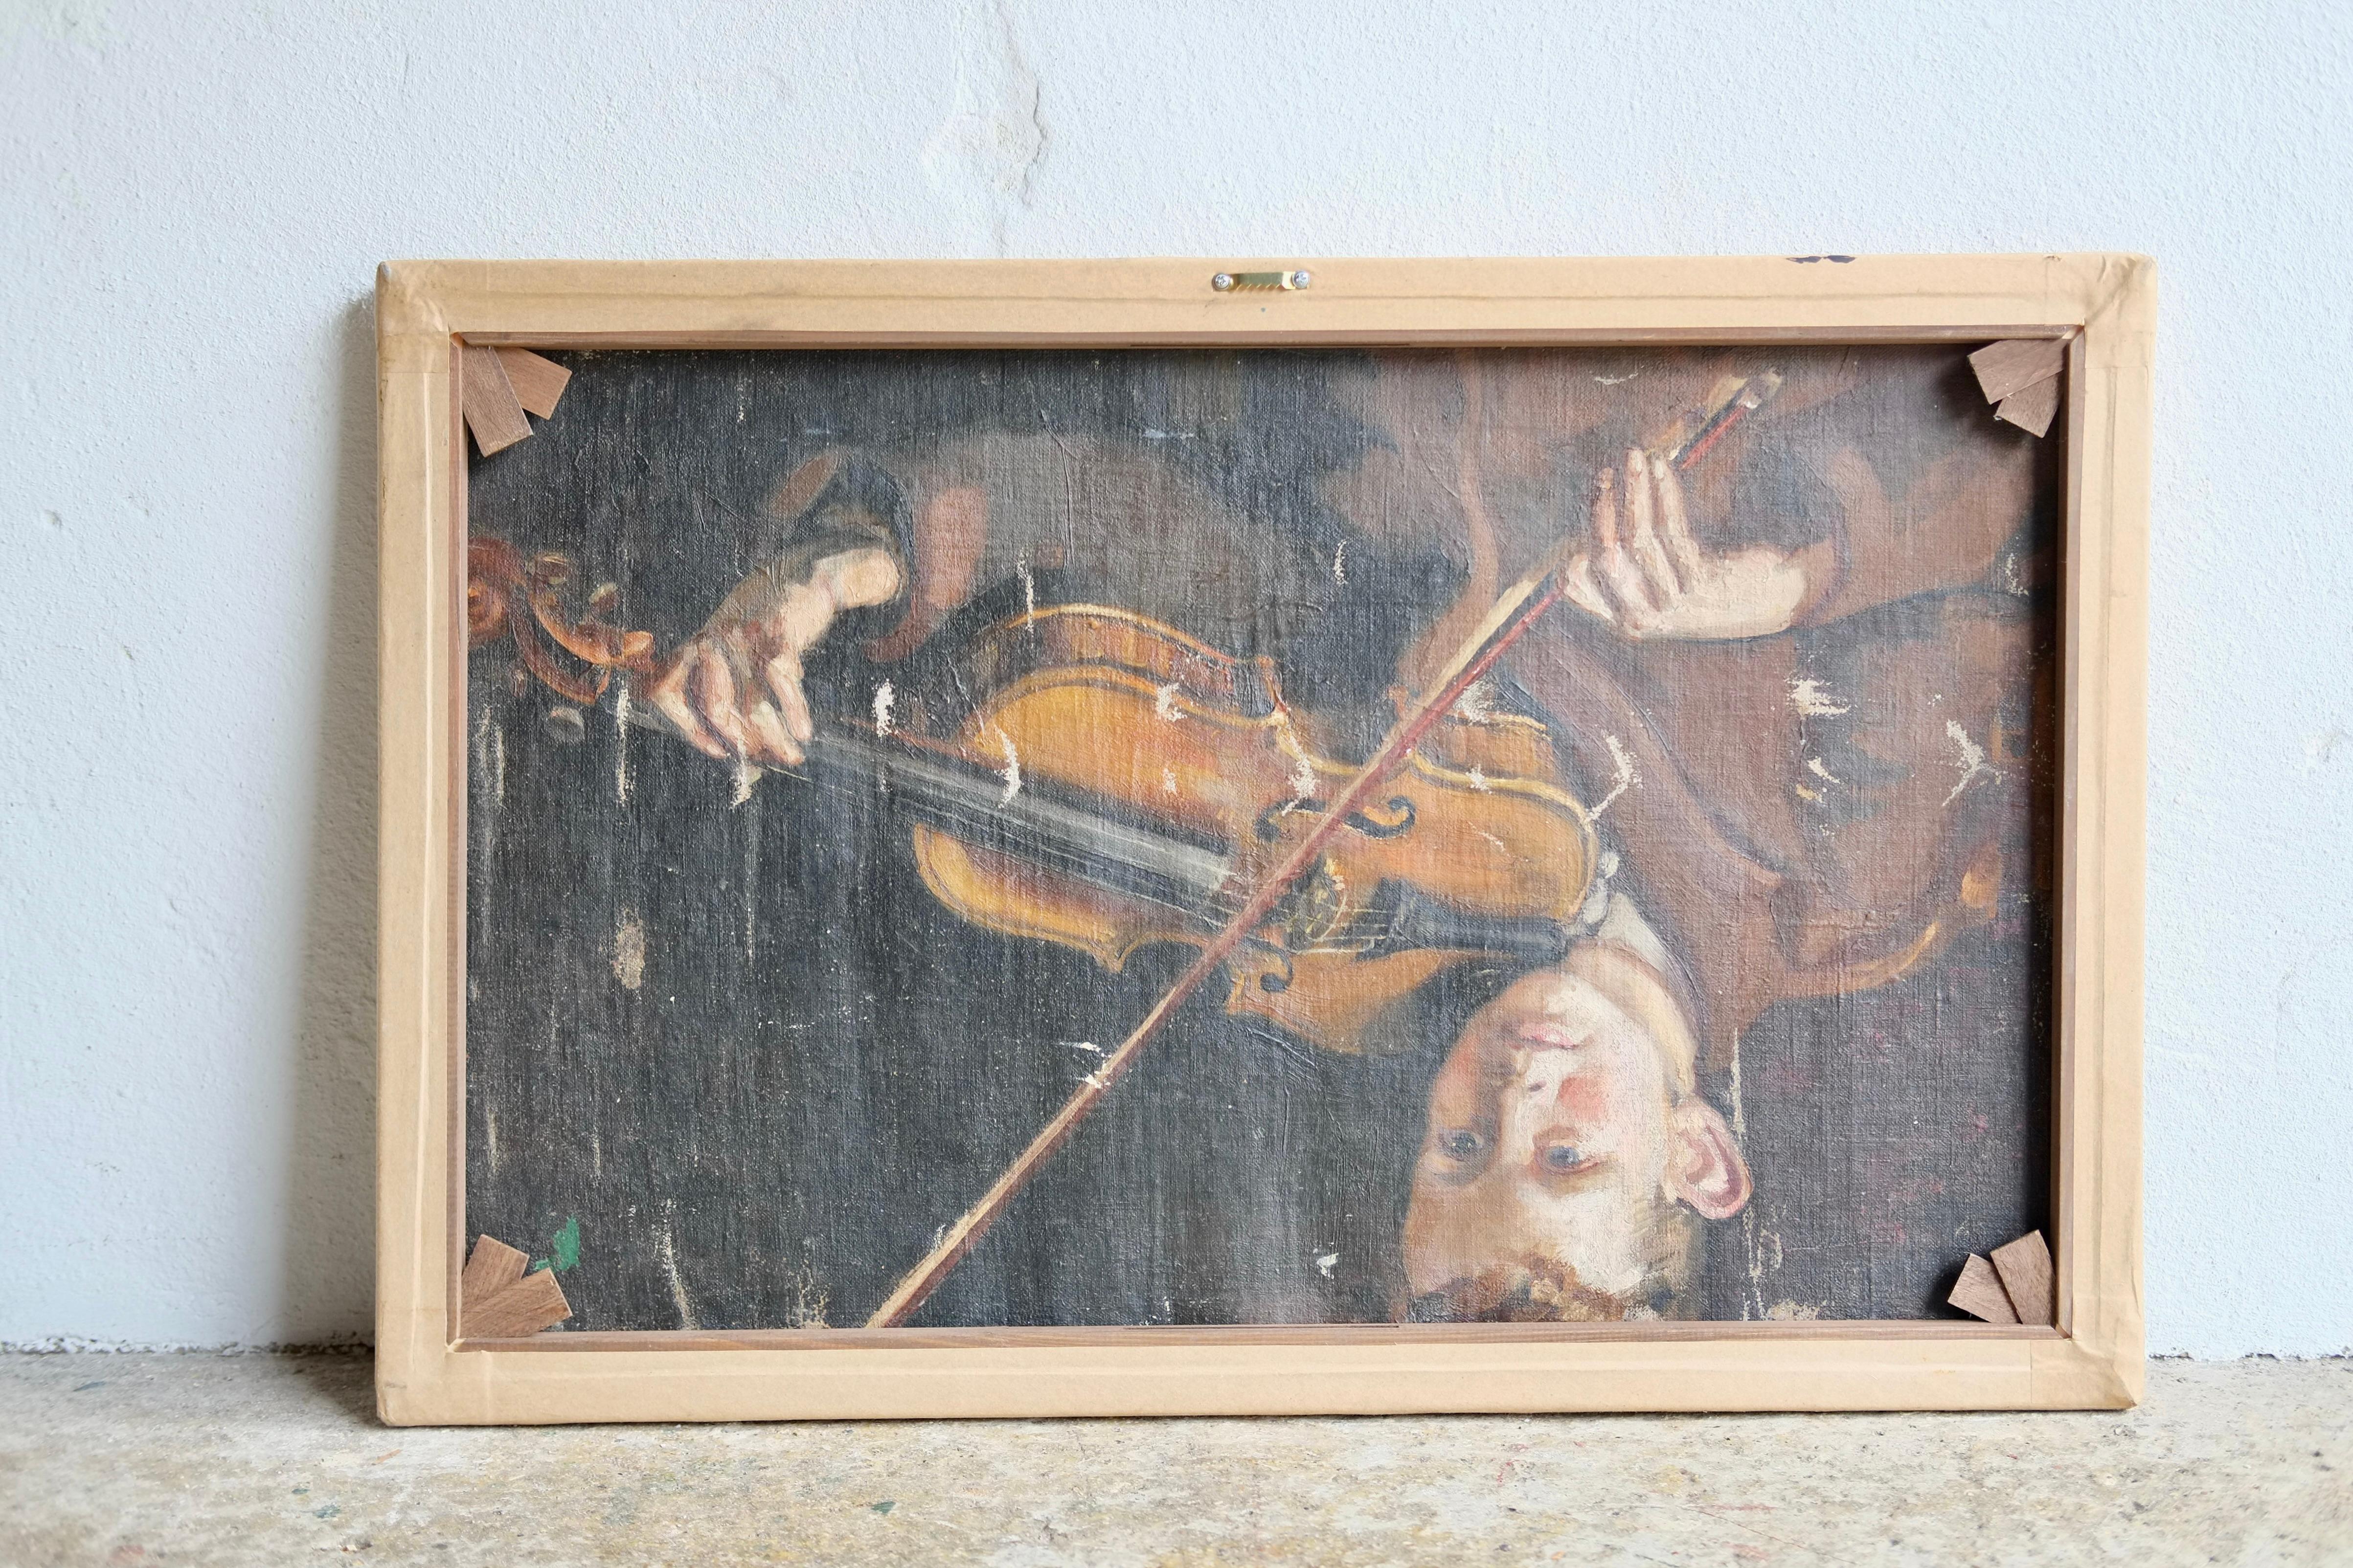 An unsigned 20th century northern school oil on canvas oil on canvas of labourers in an industrial setting. There is a study of a young boy playing the violin verso.

In good condition with no damage or loss of paint. 